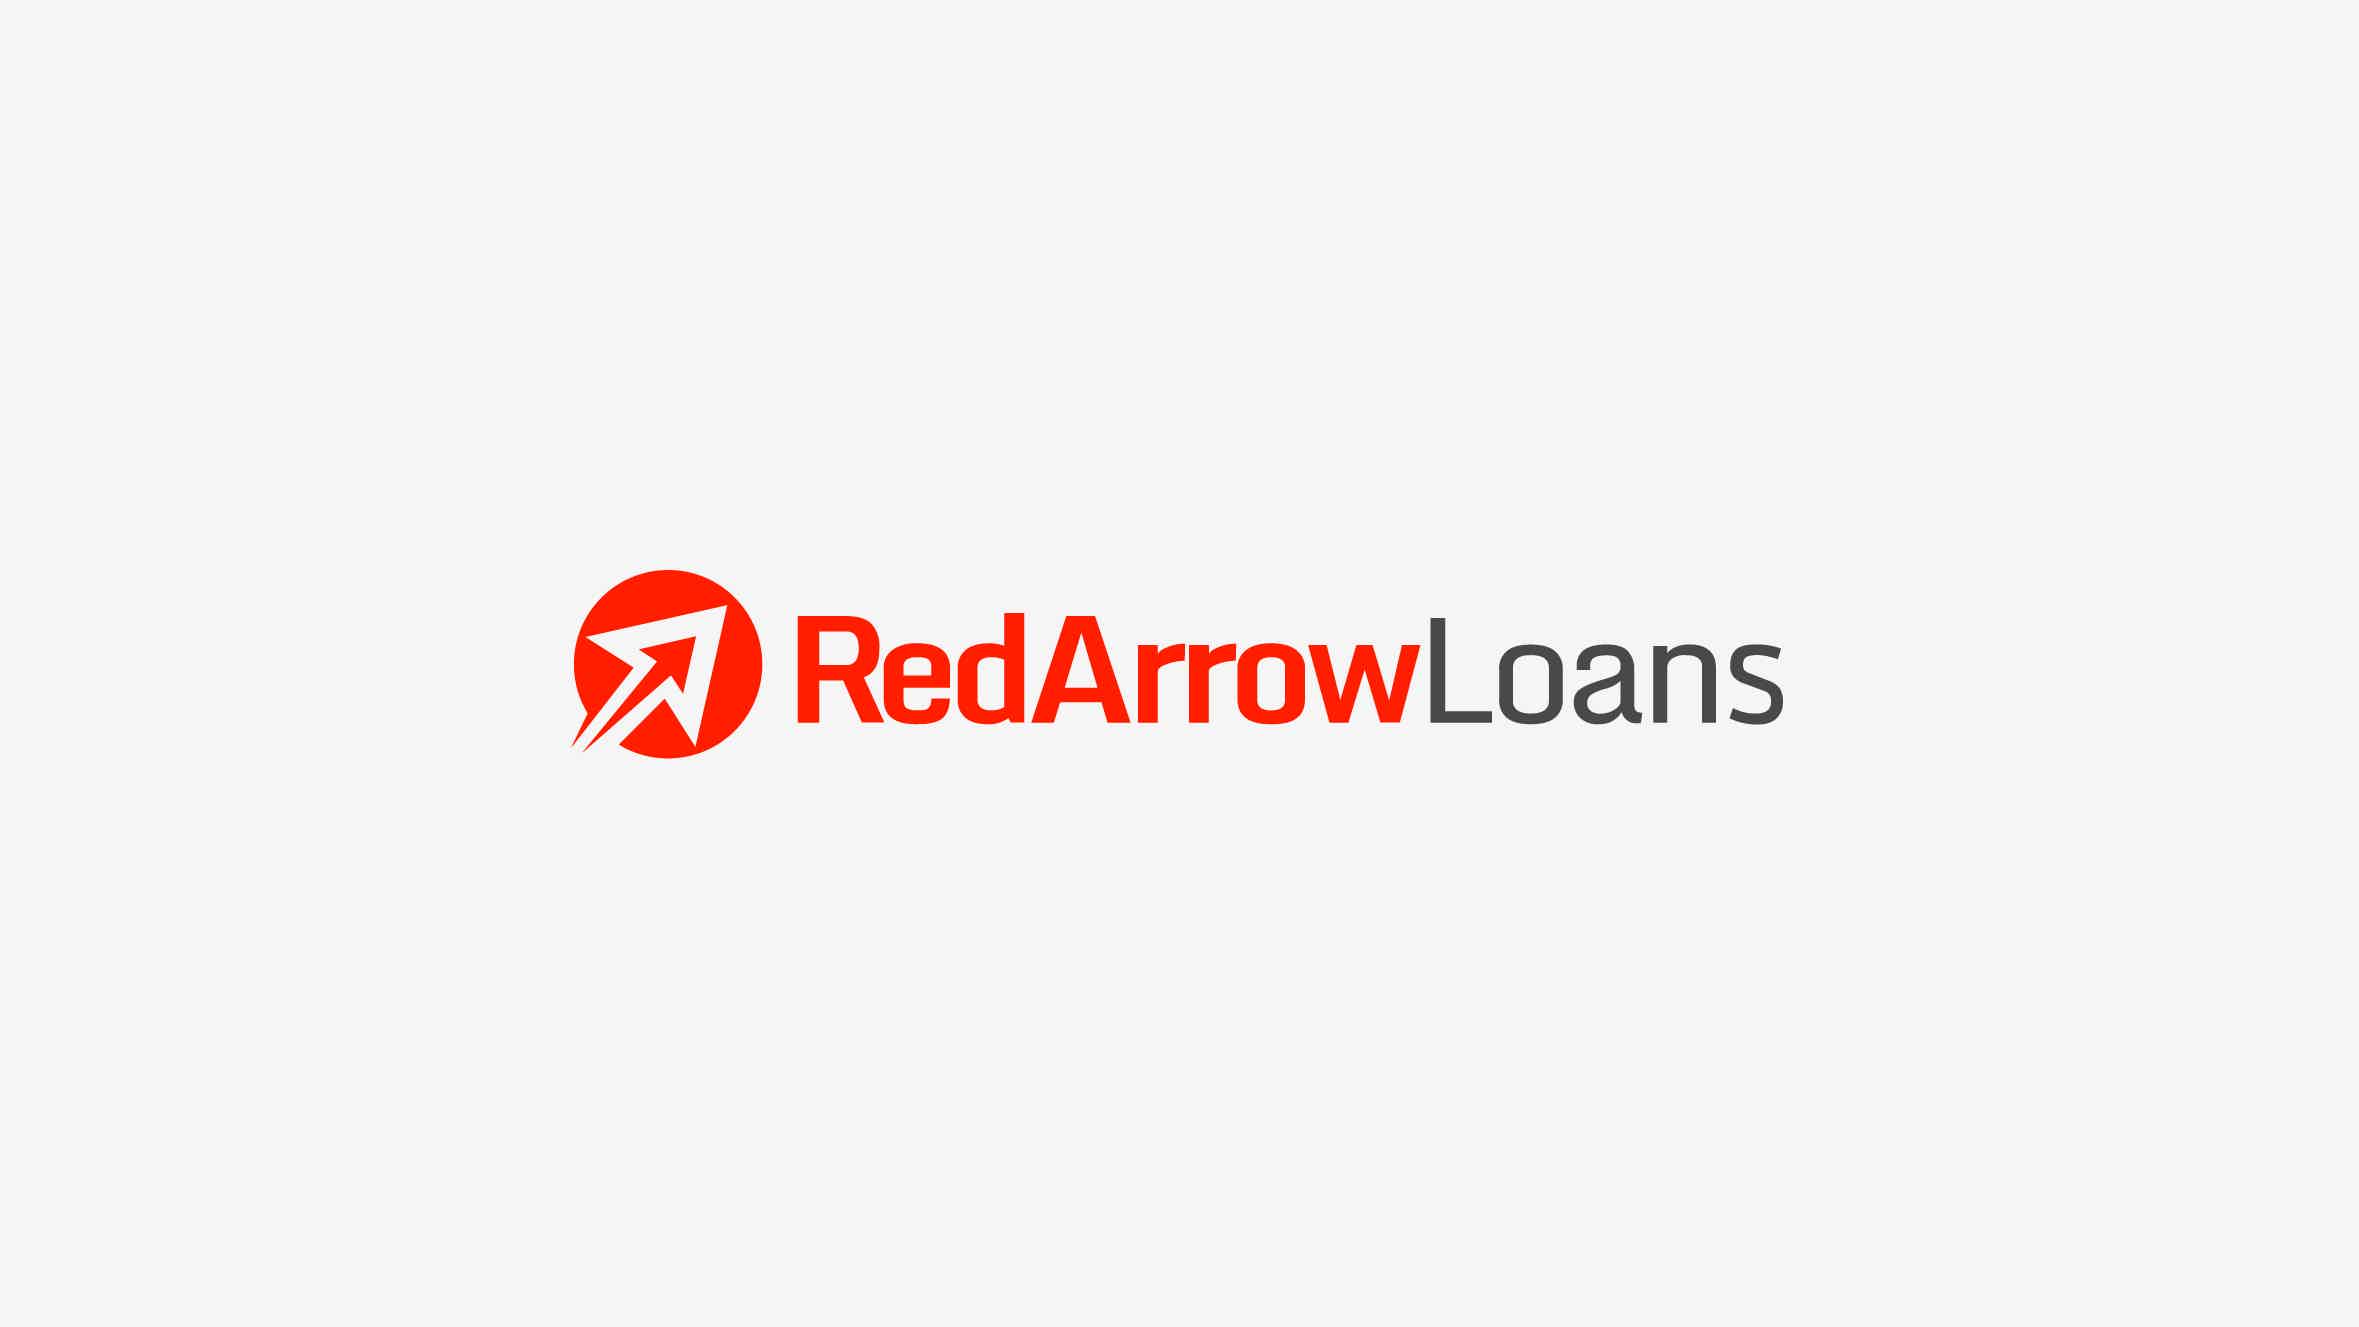 See what the benefits of the Red Arrow Loans are. Source: Red Arrow Loans.